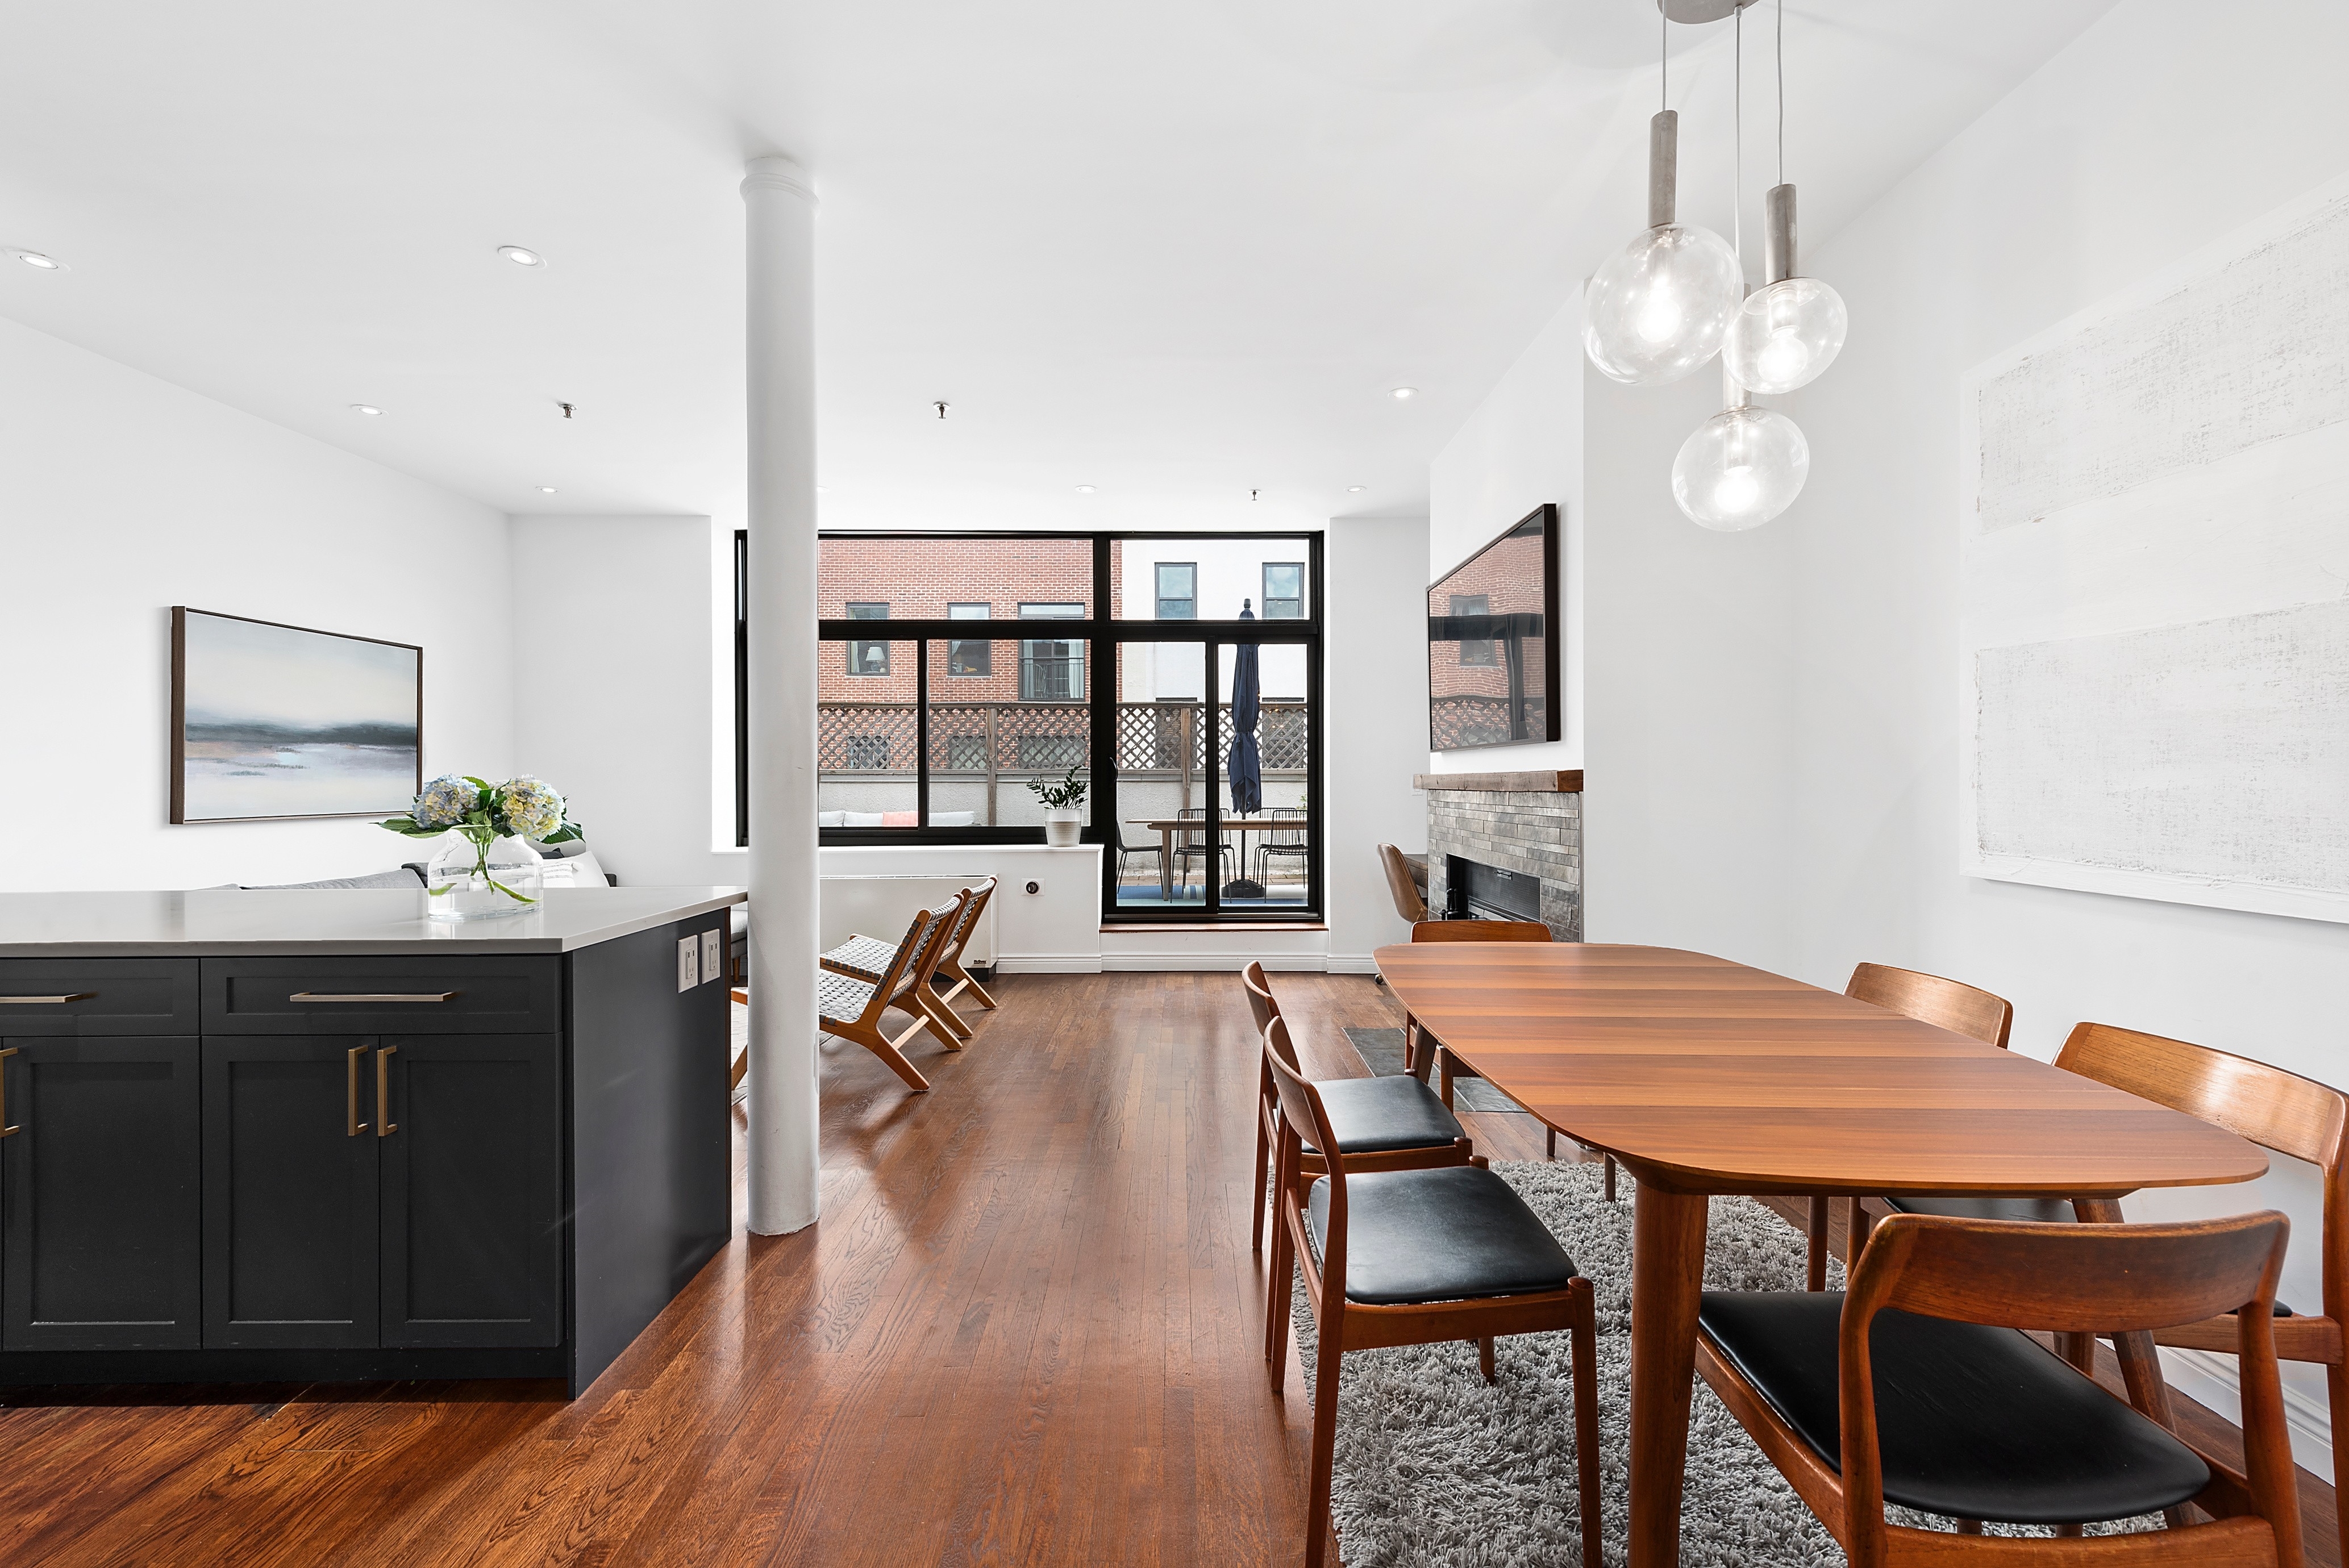 Property at Cobble Hill, Brooklyn, New York 11201